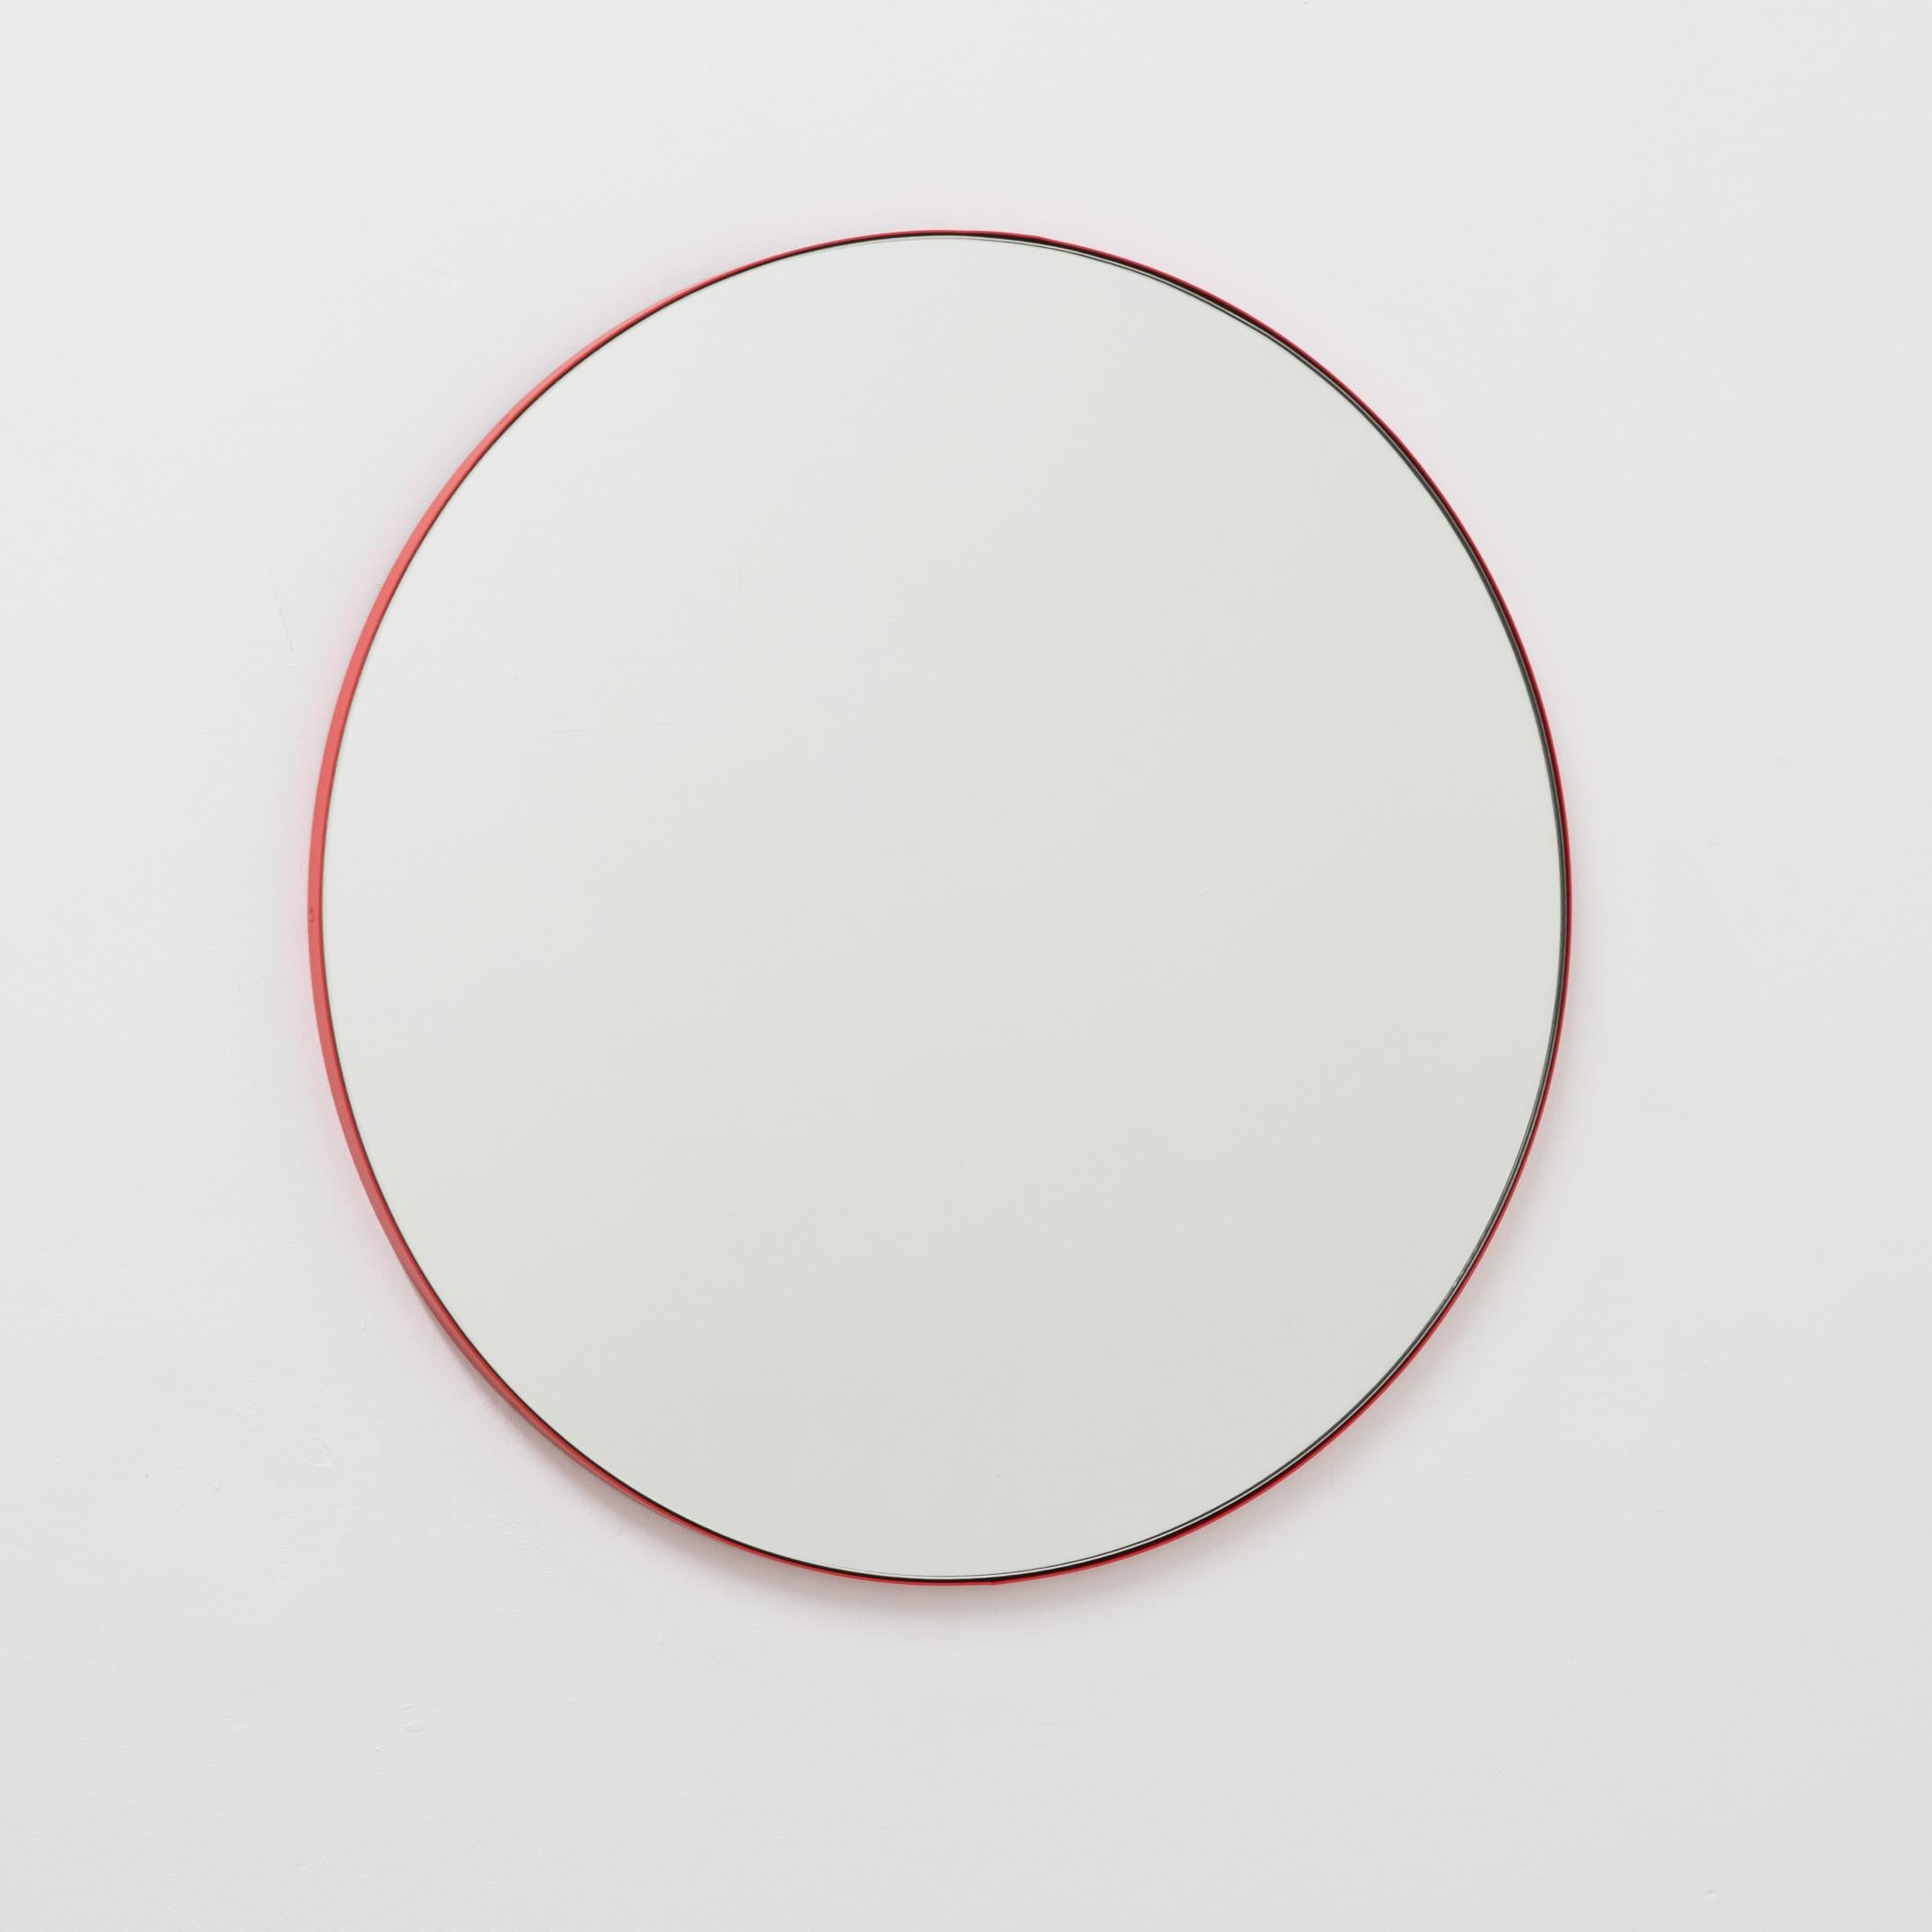 Orbis Round Contemporary Mirror with Red Frame, Small In New Condition For Sale In London, GB